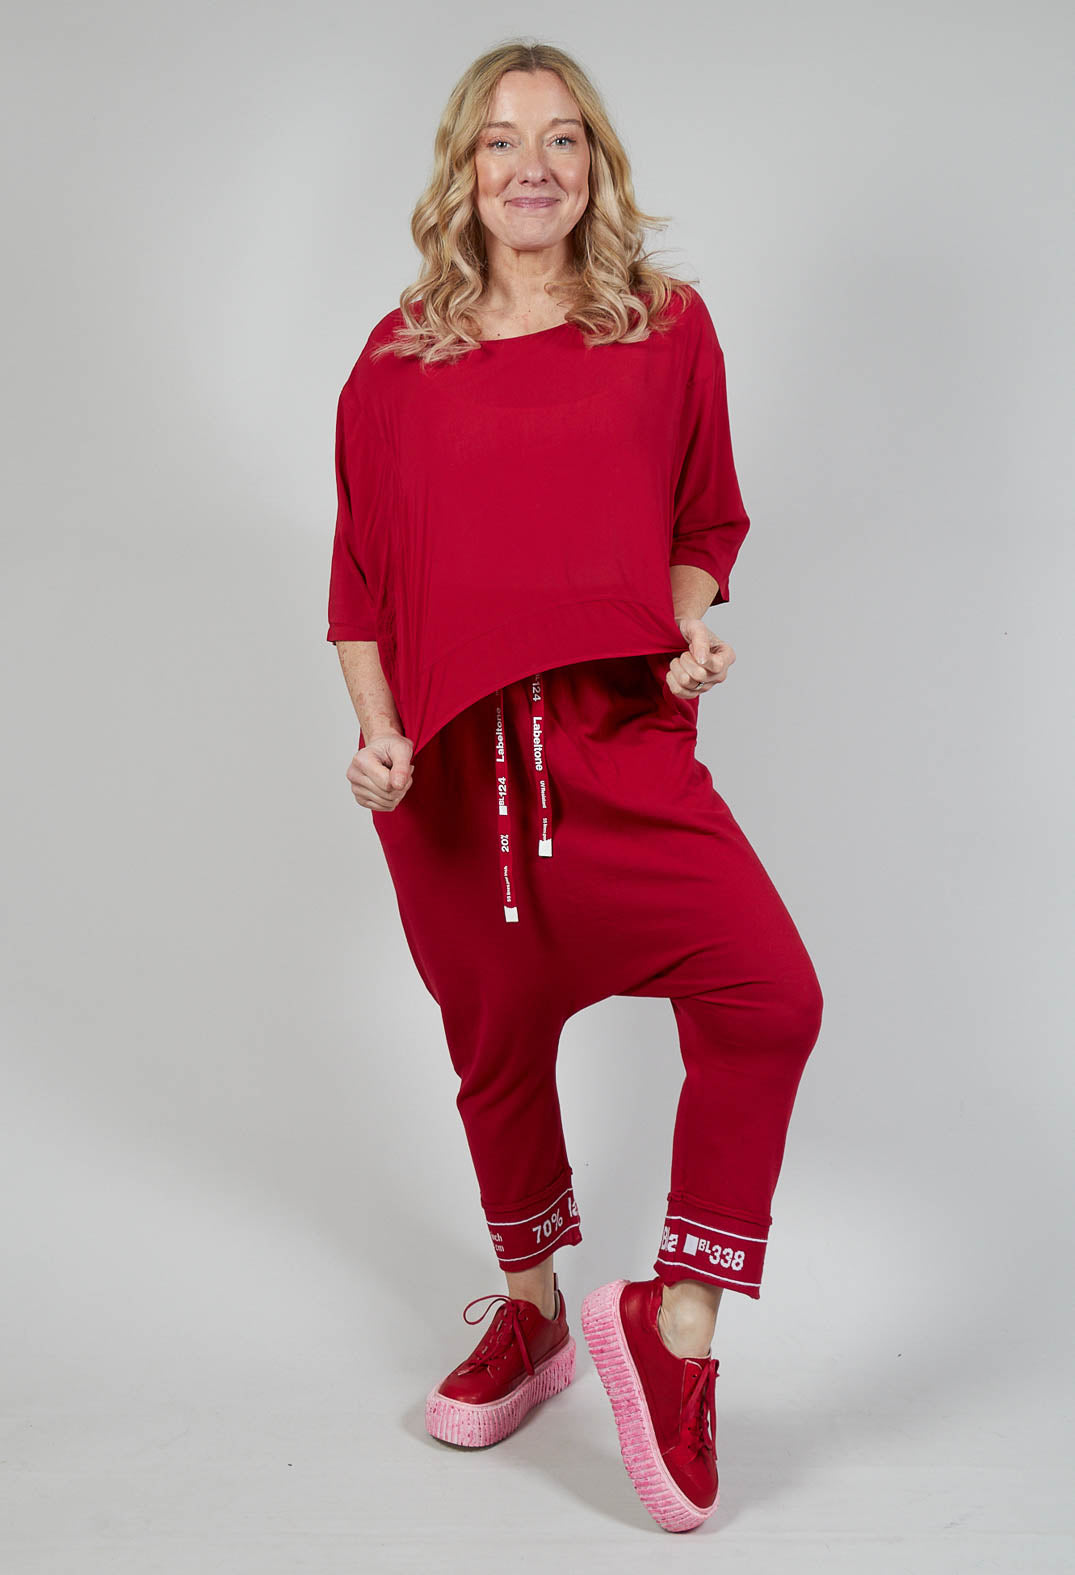 Relaxed Fit Jersey Top in Chili